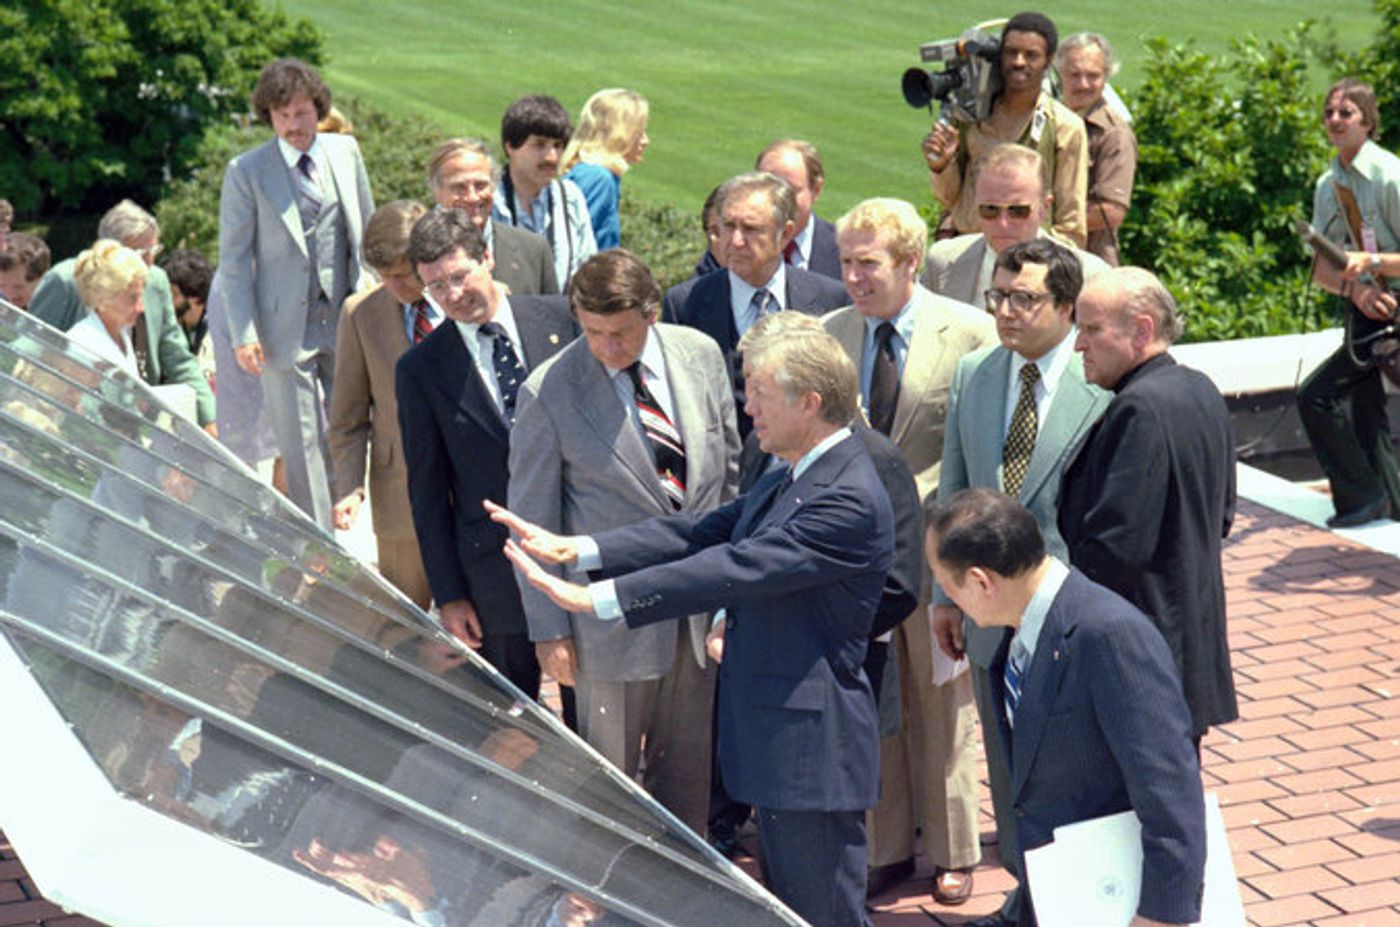 In 1979, President Carter showed off new solar panels on the West Wing. Photo: The NY Times